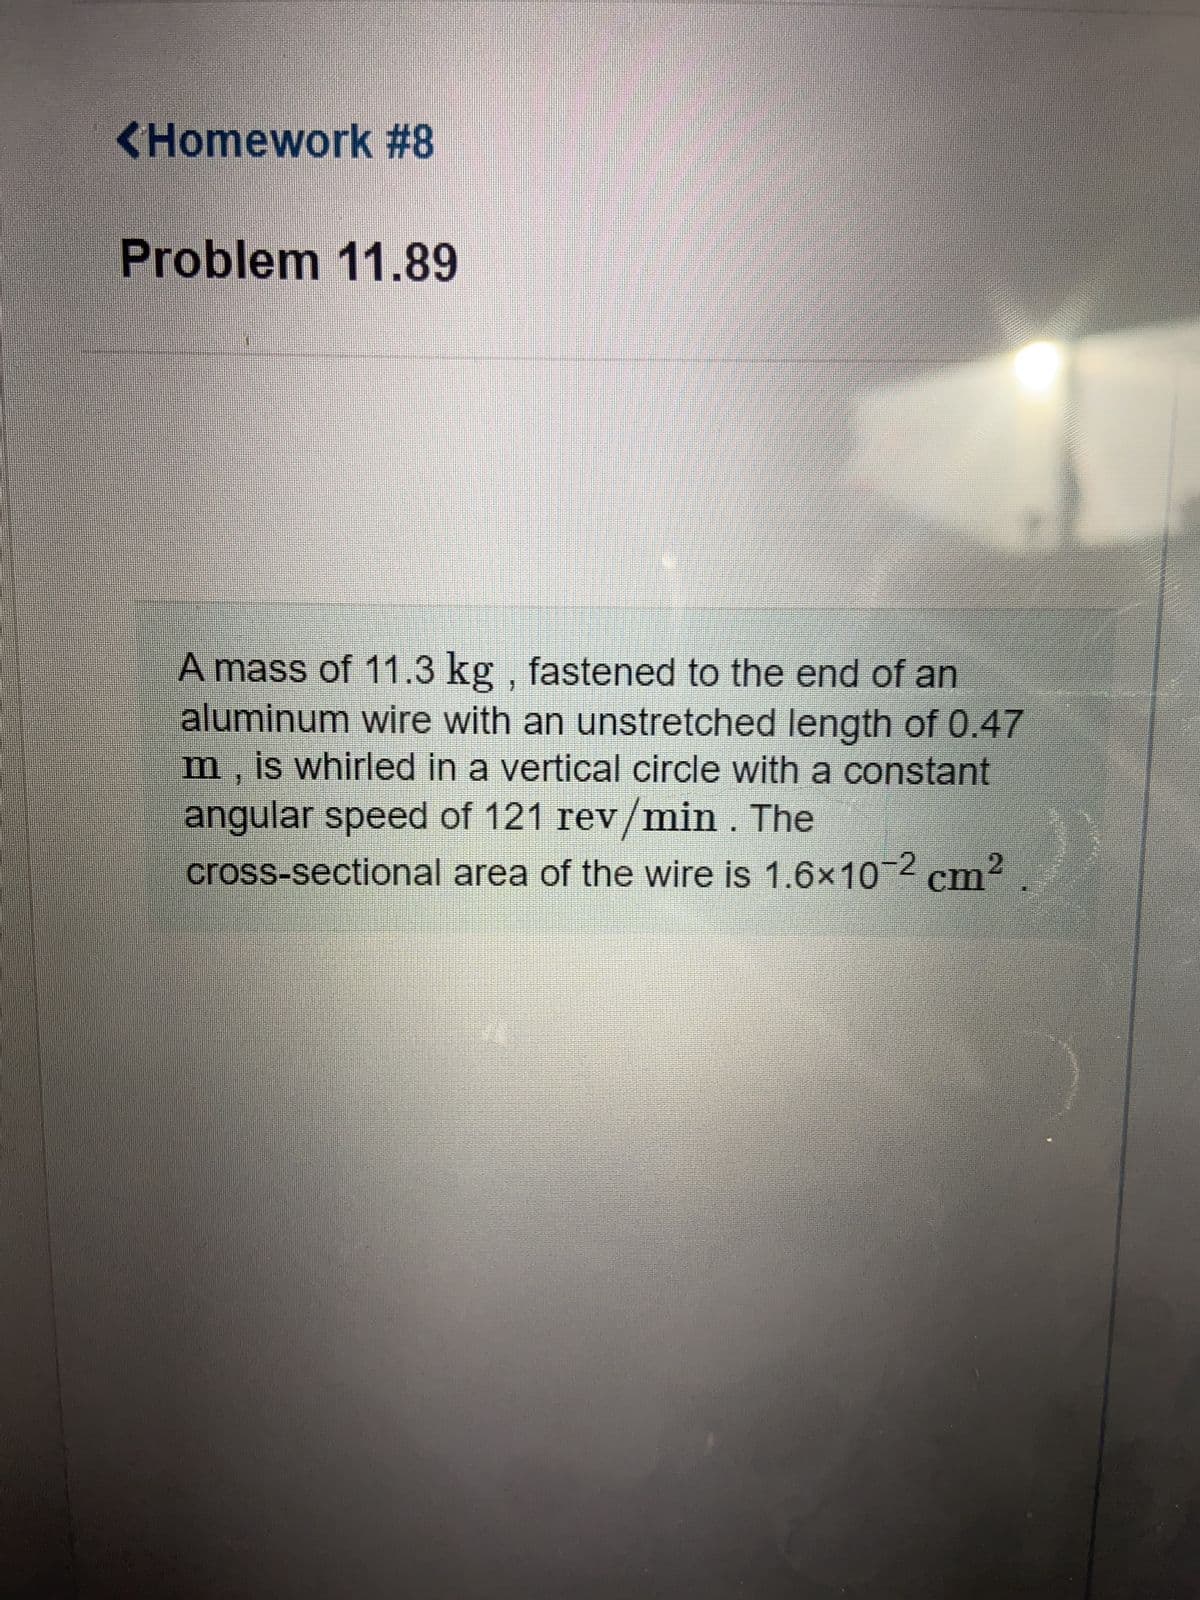 <Homework #8
Problem 11.89
A mass of 11.3 kg, fastened to the end of an
aluminum wire with an unstretched length of 0.47
m, is whirled in a vertical circle with a constant
angular speed of 121 rev/min . The
cross-sectional area of the wire is 1.6×10-2 cm²